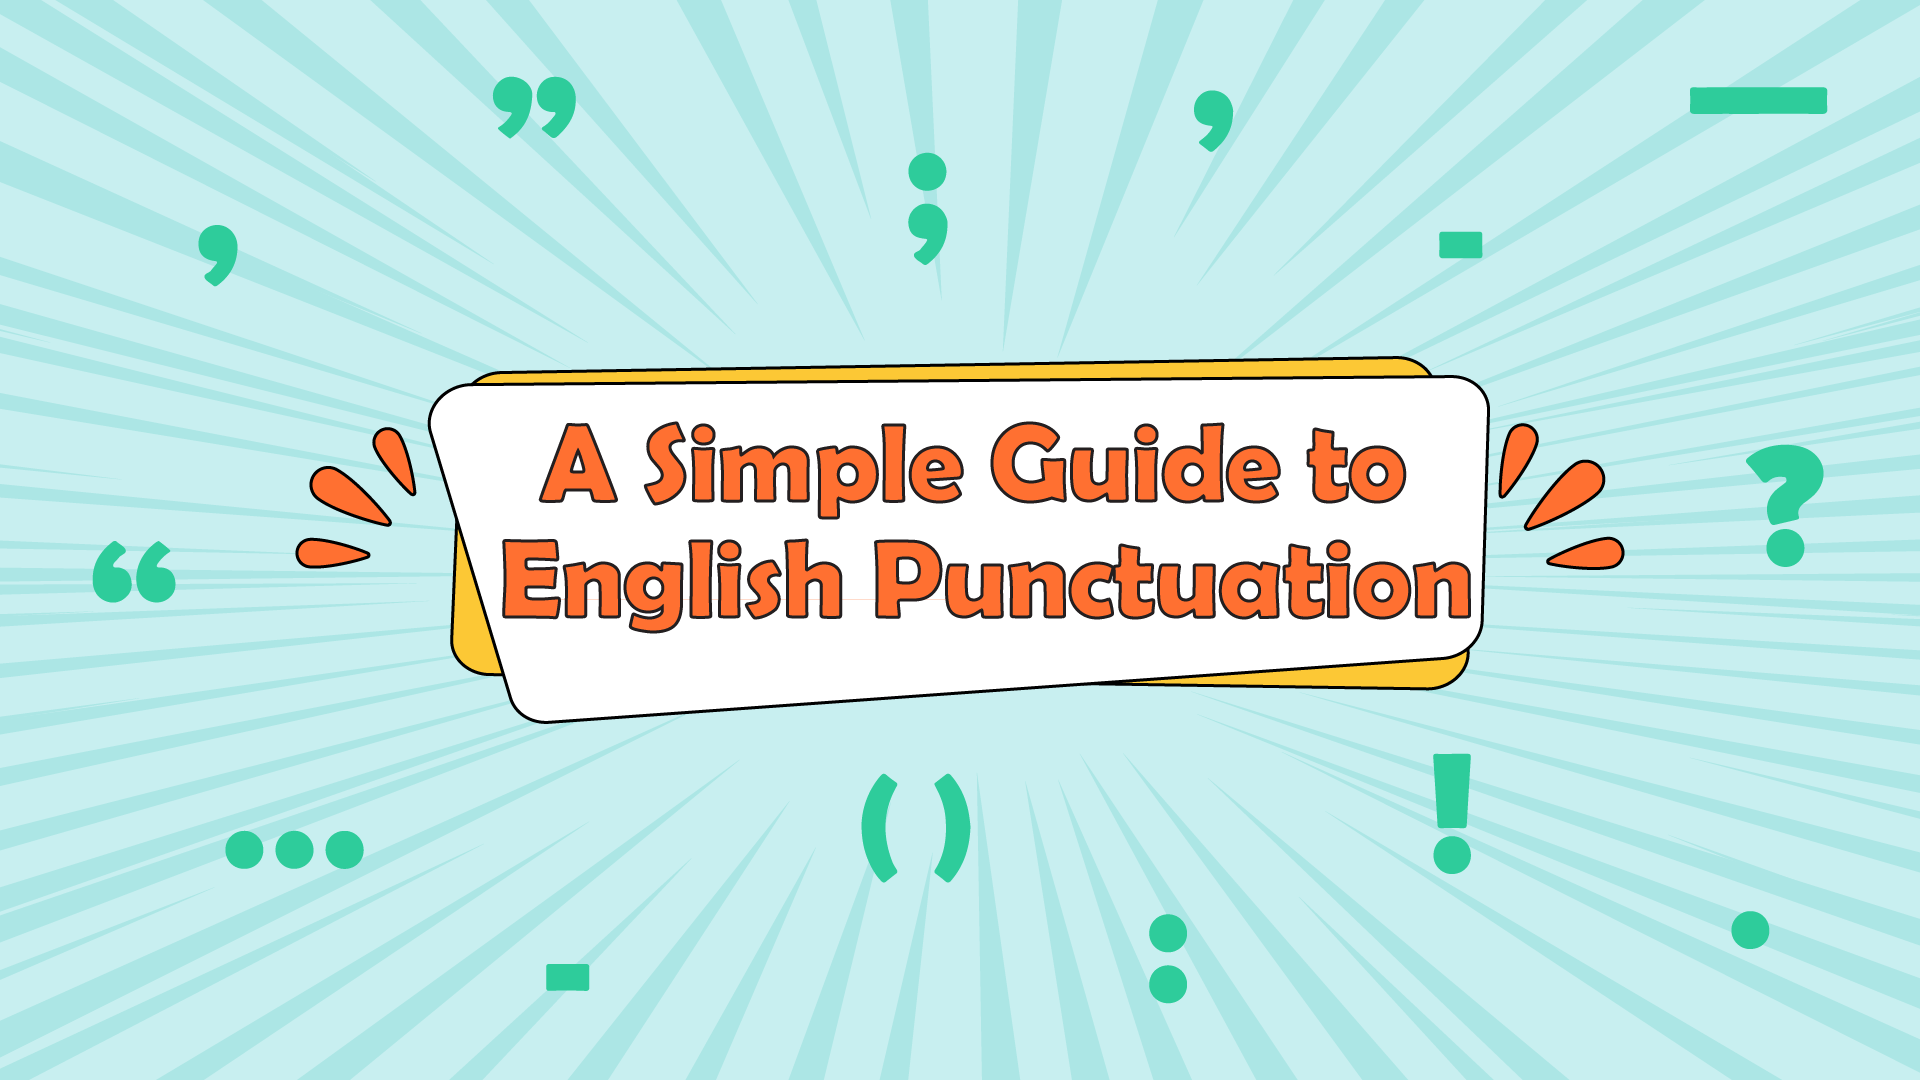 A Simple Guide to English Punctuation